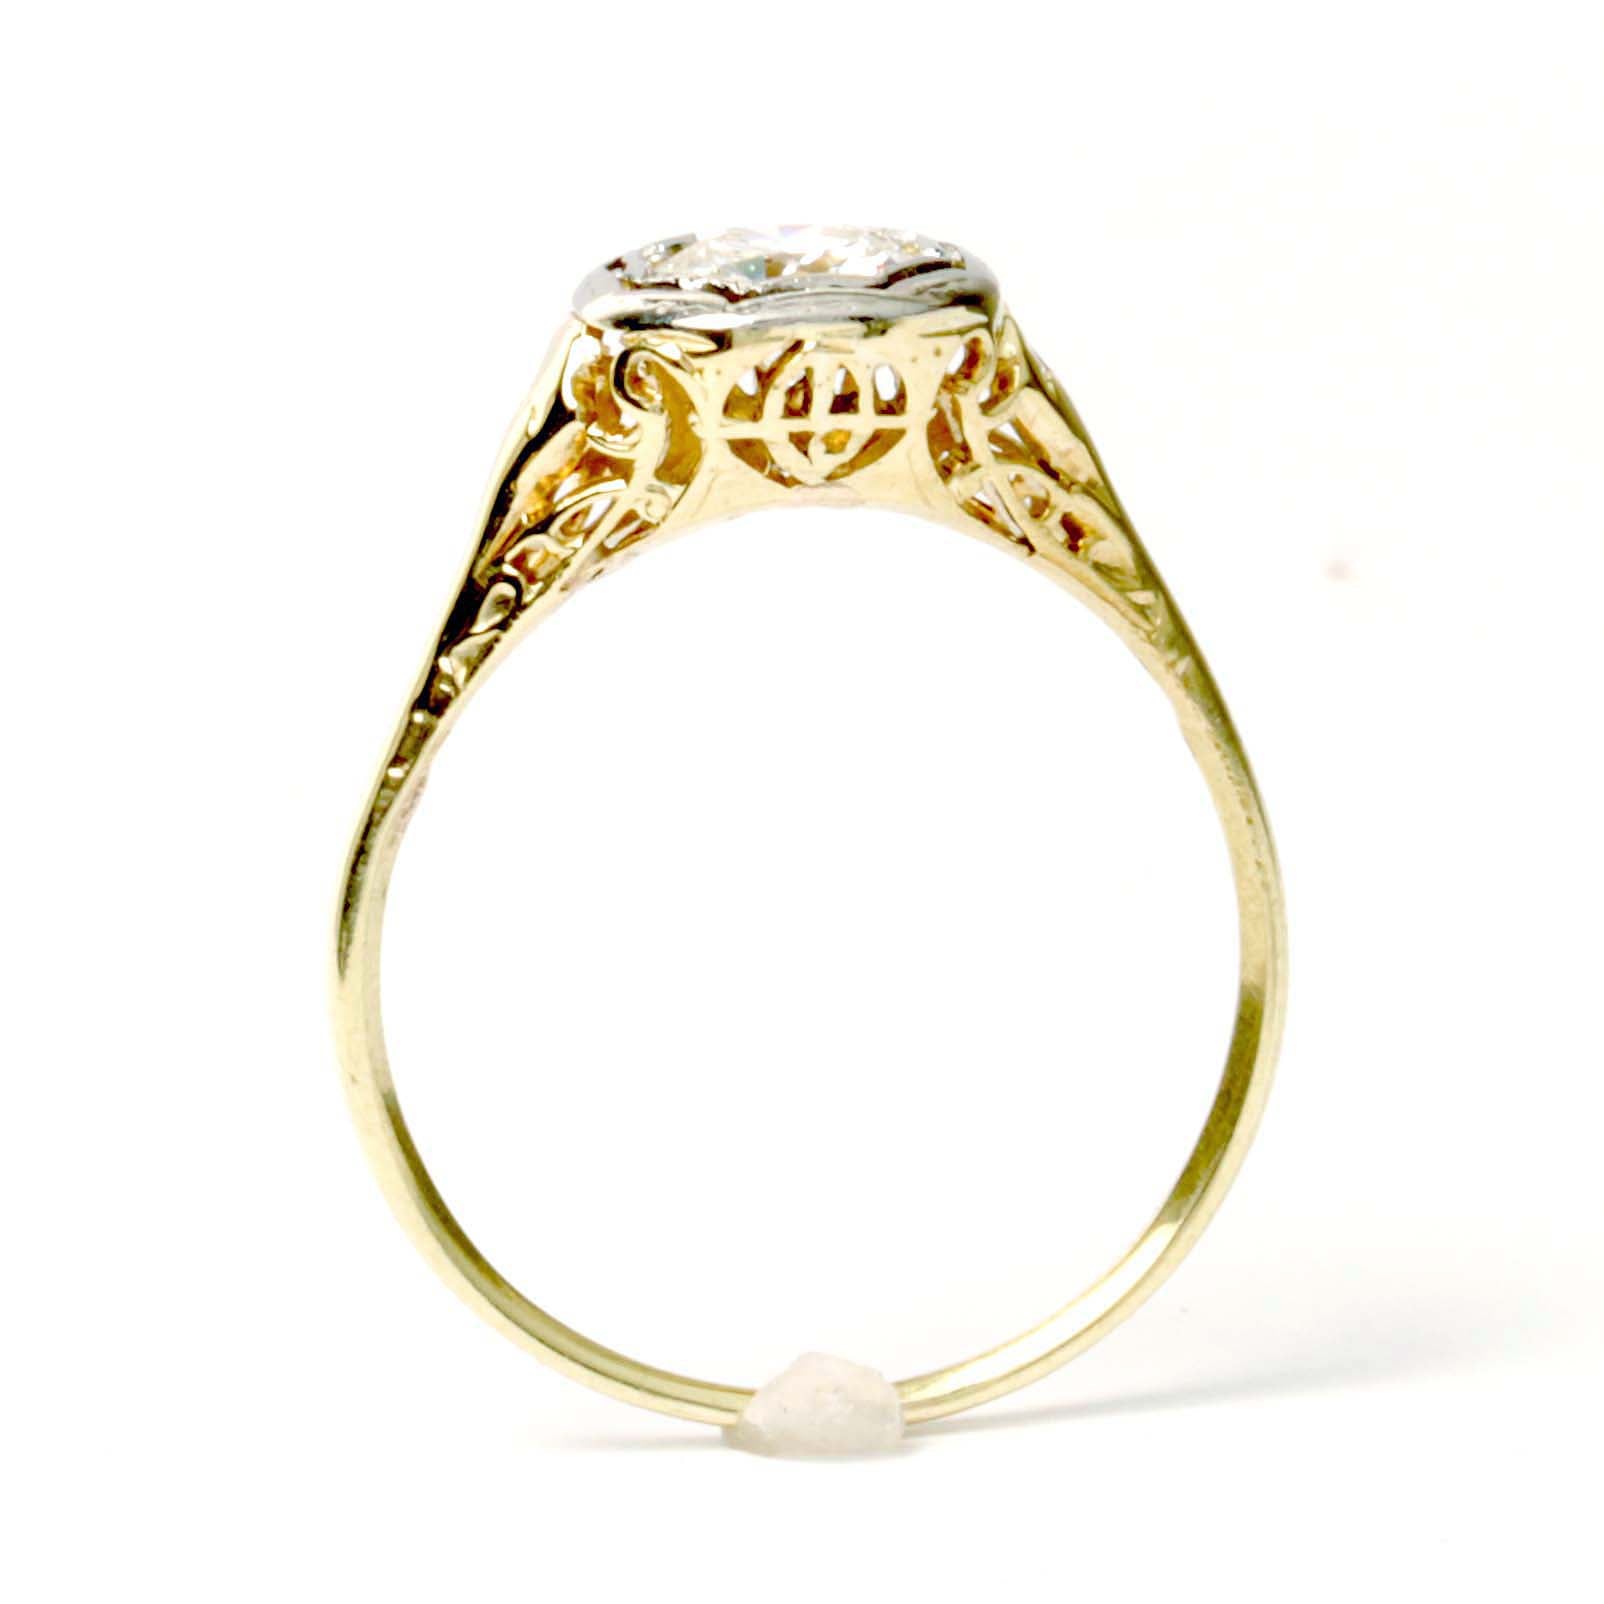 Early Art Déco Engagement Ring #VR201201-2